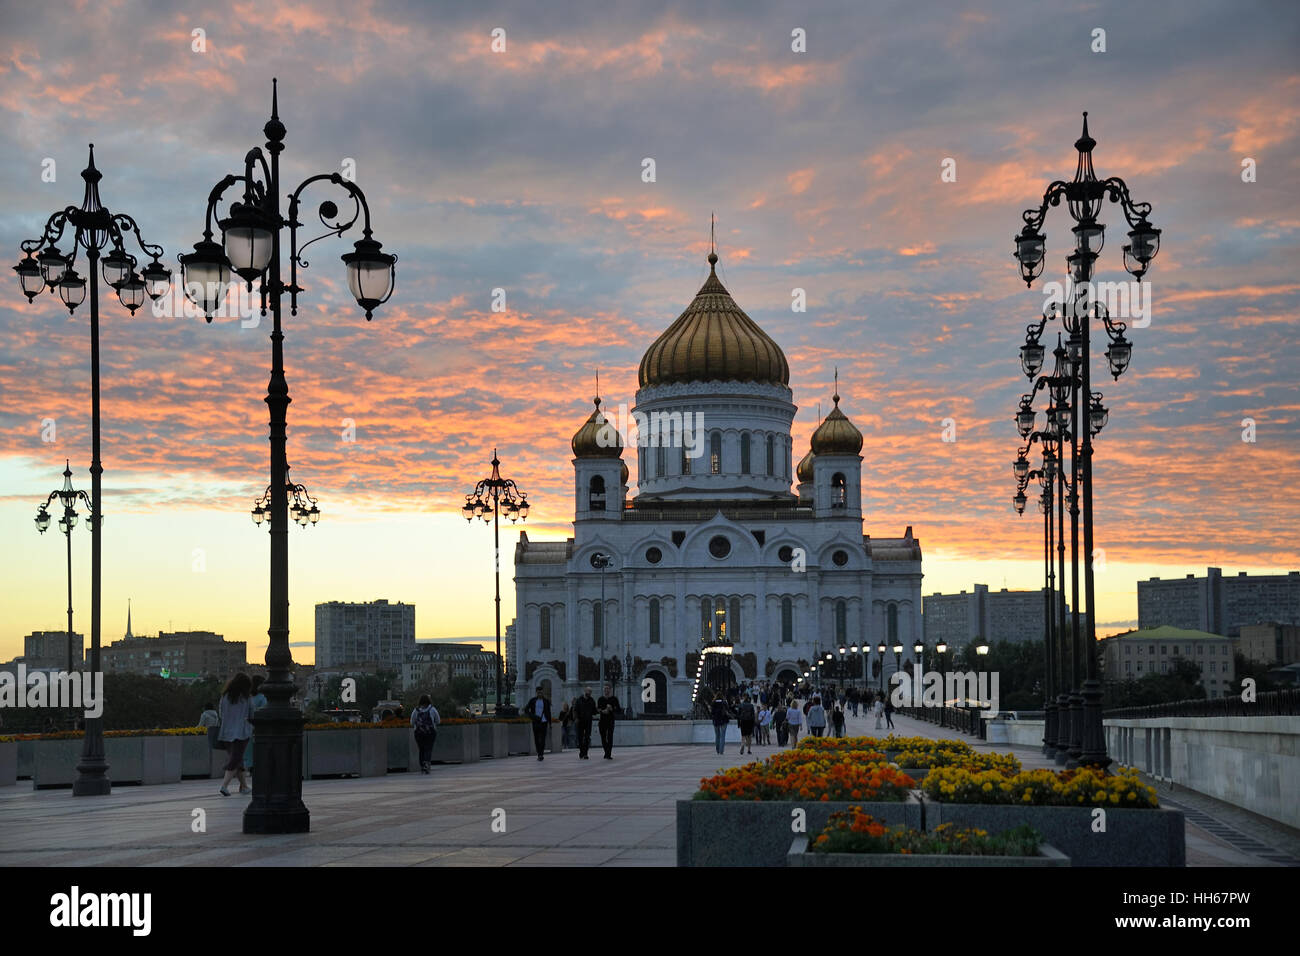 Walking on Patriarchy Bridge in the Sweet Light before Sunset. Cathedral of Christ the Savior in between old-style street lamps Stock Photo